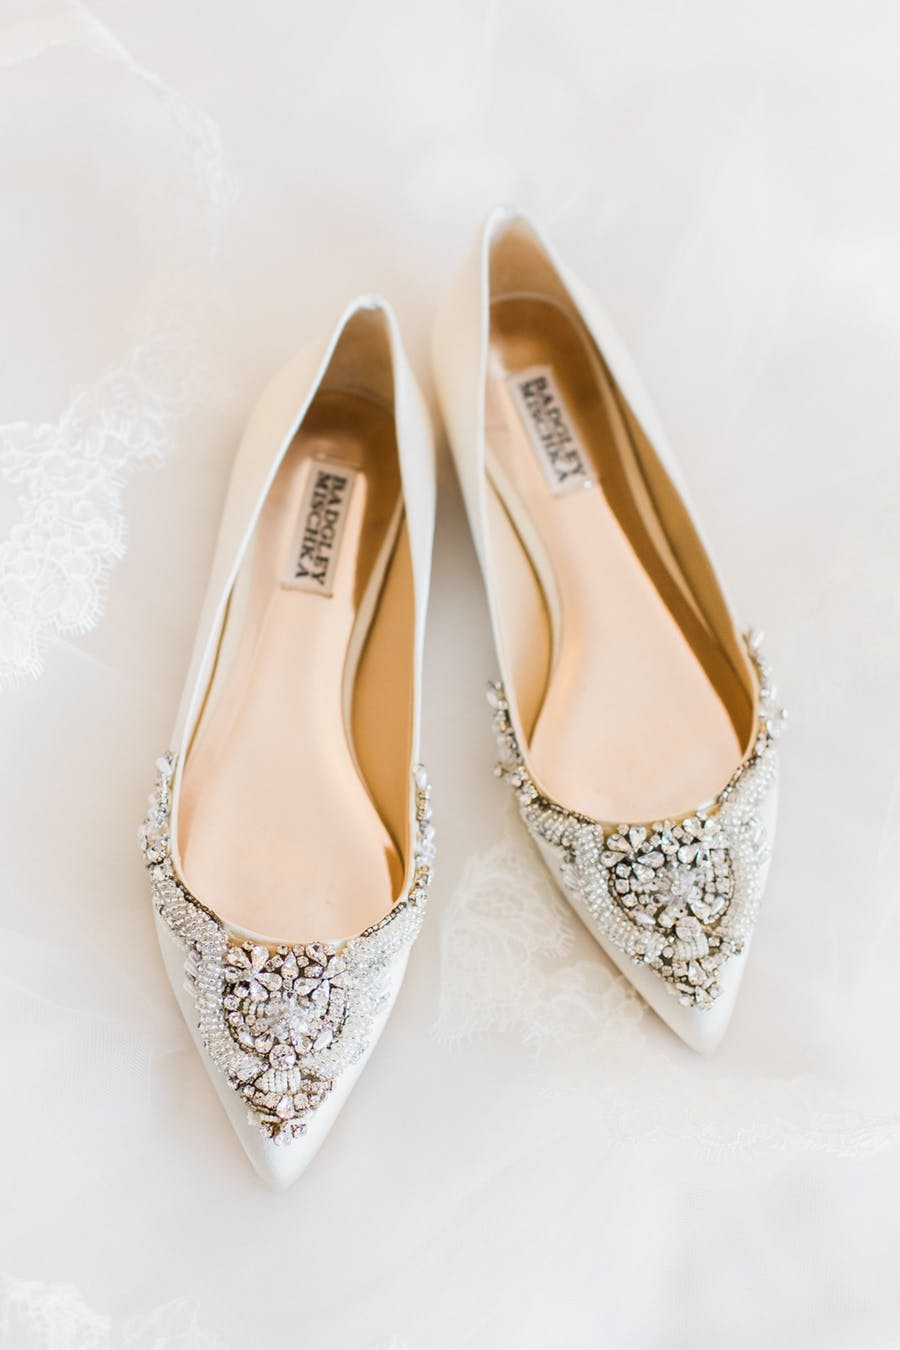 The wedding shoes were chic embellished flats